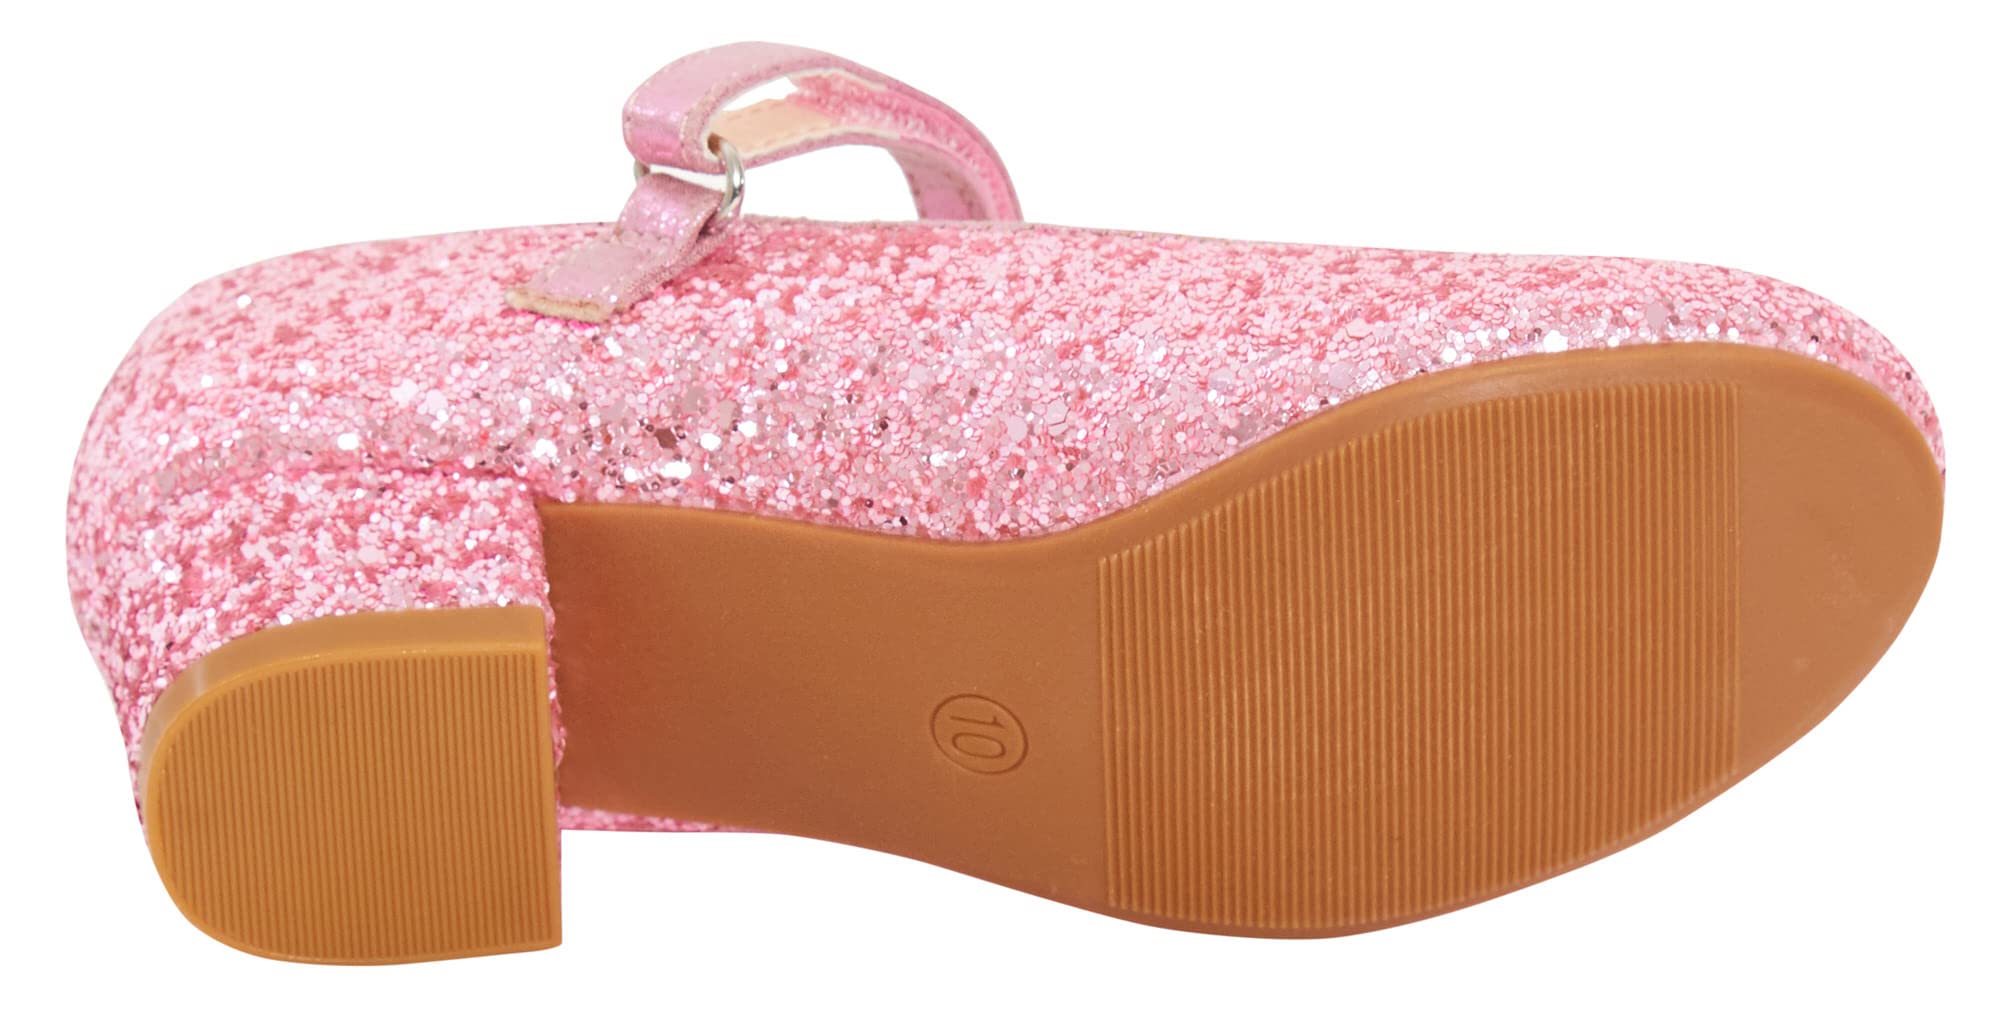 Lora Dora Girls Faux Leather Party Shoes Pink Glitter 1 UK